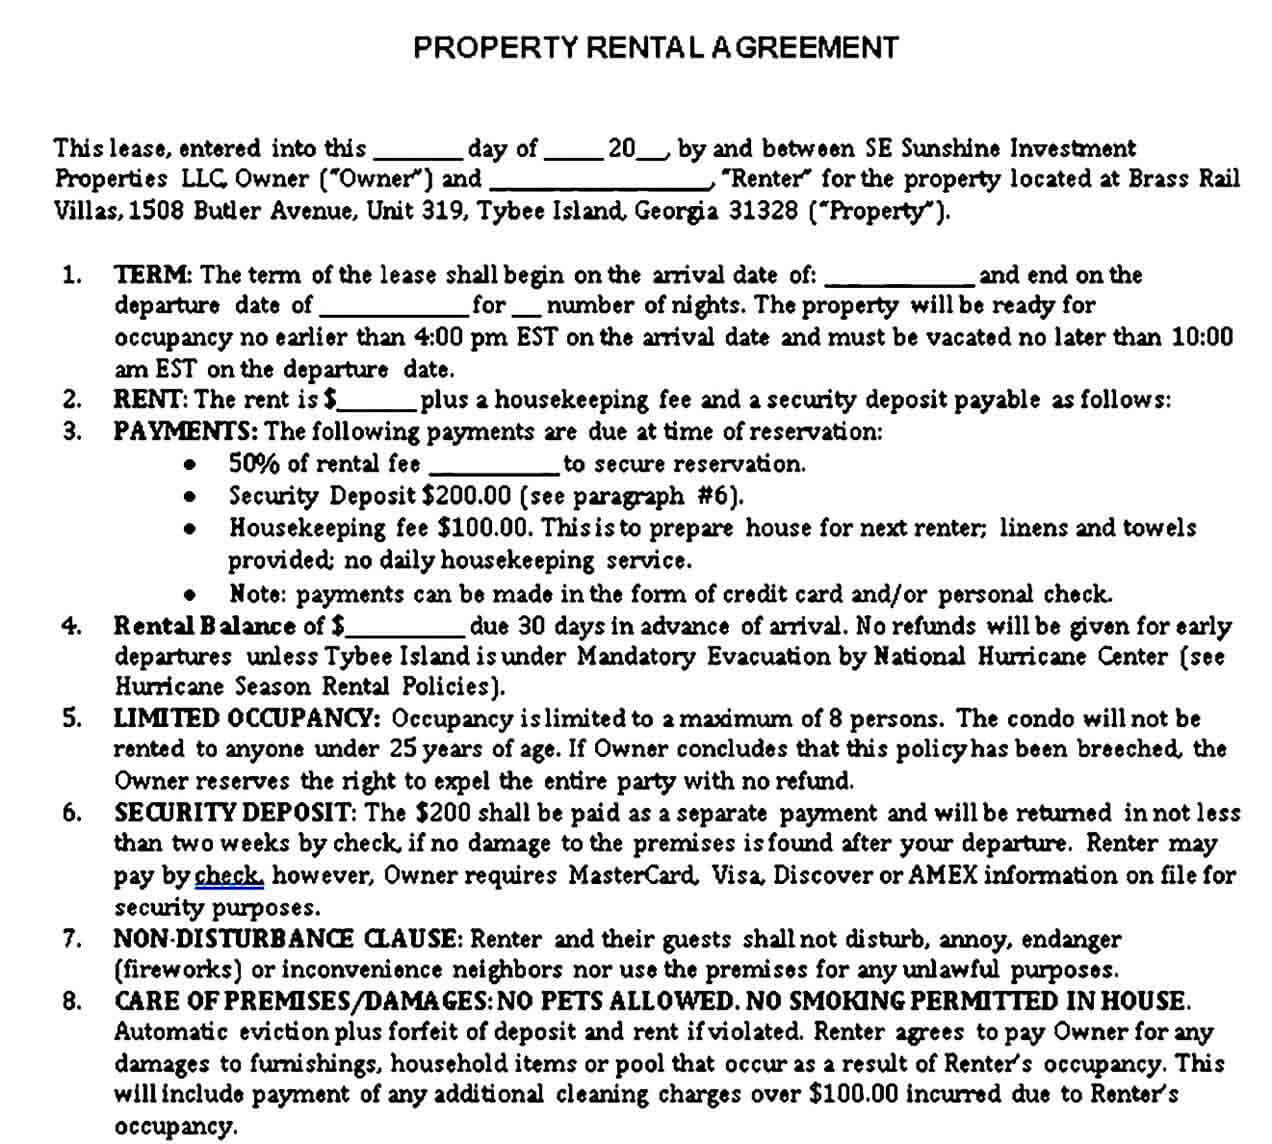 Vacation Property Rental Agreement